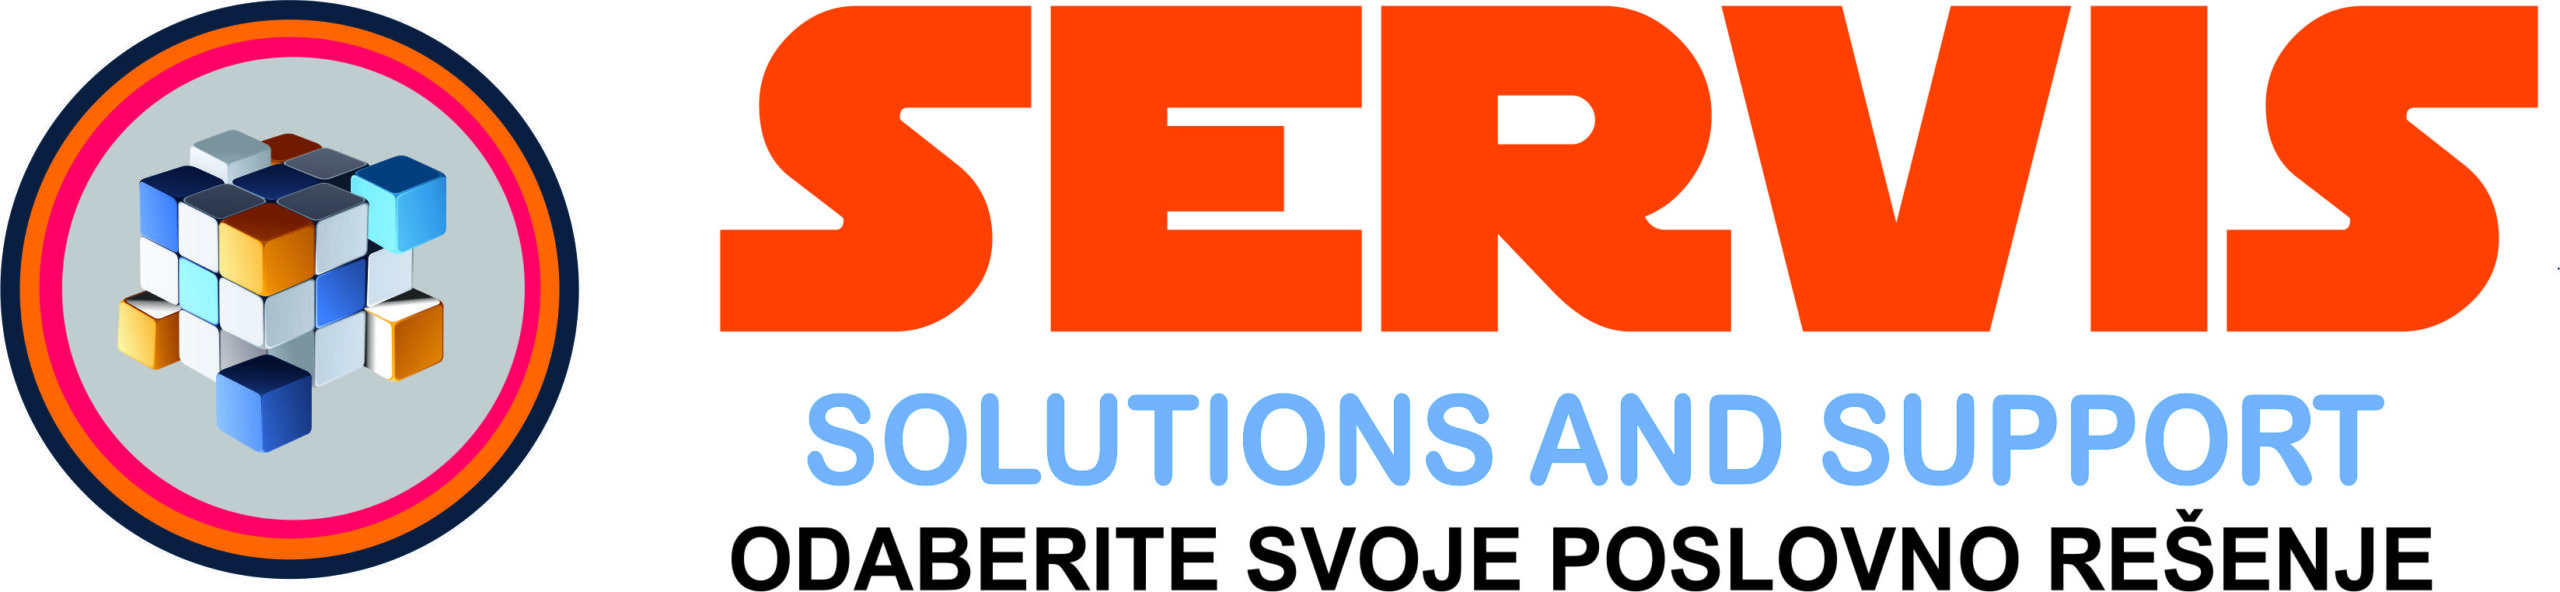 Servis Solutions and Support